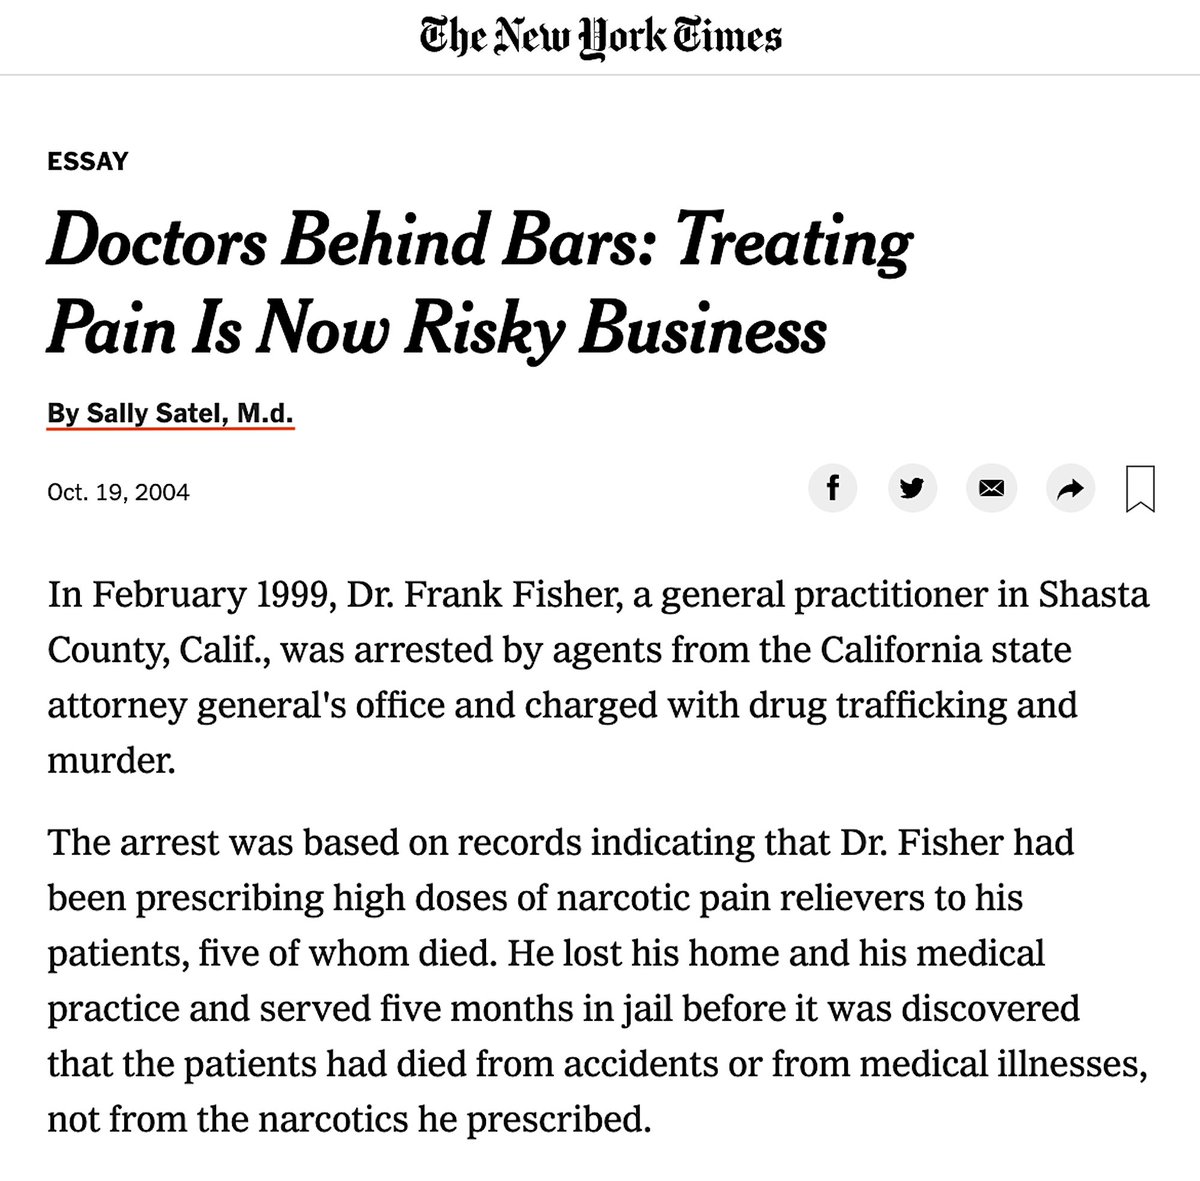 "Pain Management Has Become A Crime Story When It Really Should Be A Health Care Story." ― David Joranson, Director Of 'The Pain And Policy Studies Group' At The University Of Wisconsin.NYT, By Sally Satel M.D., October 19, 2004Who Is Sally Satel? https://www.nytimes.com/2004/10/19/health/policy/doctors-behind-bars-treating-pain-is-now-risky-business.html